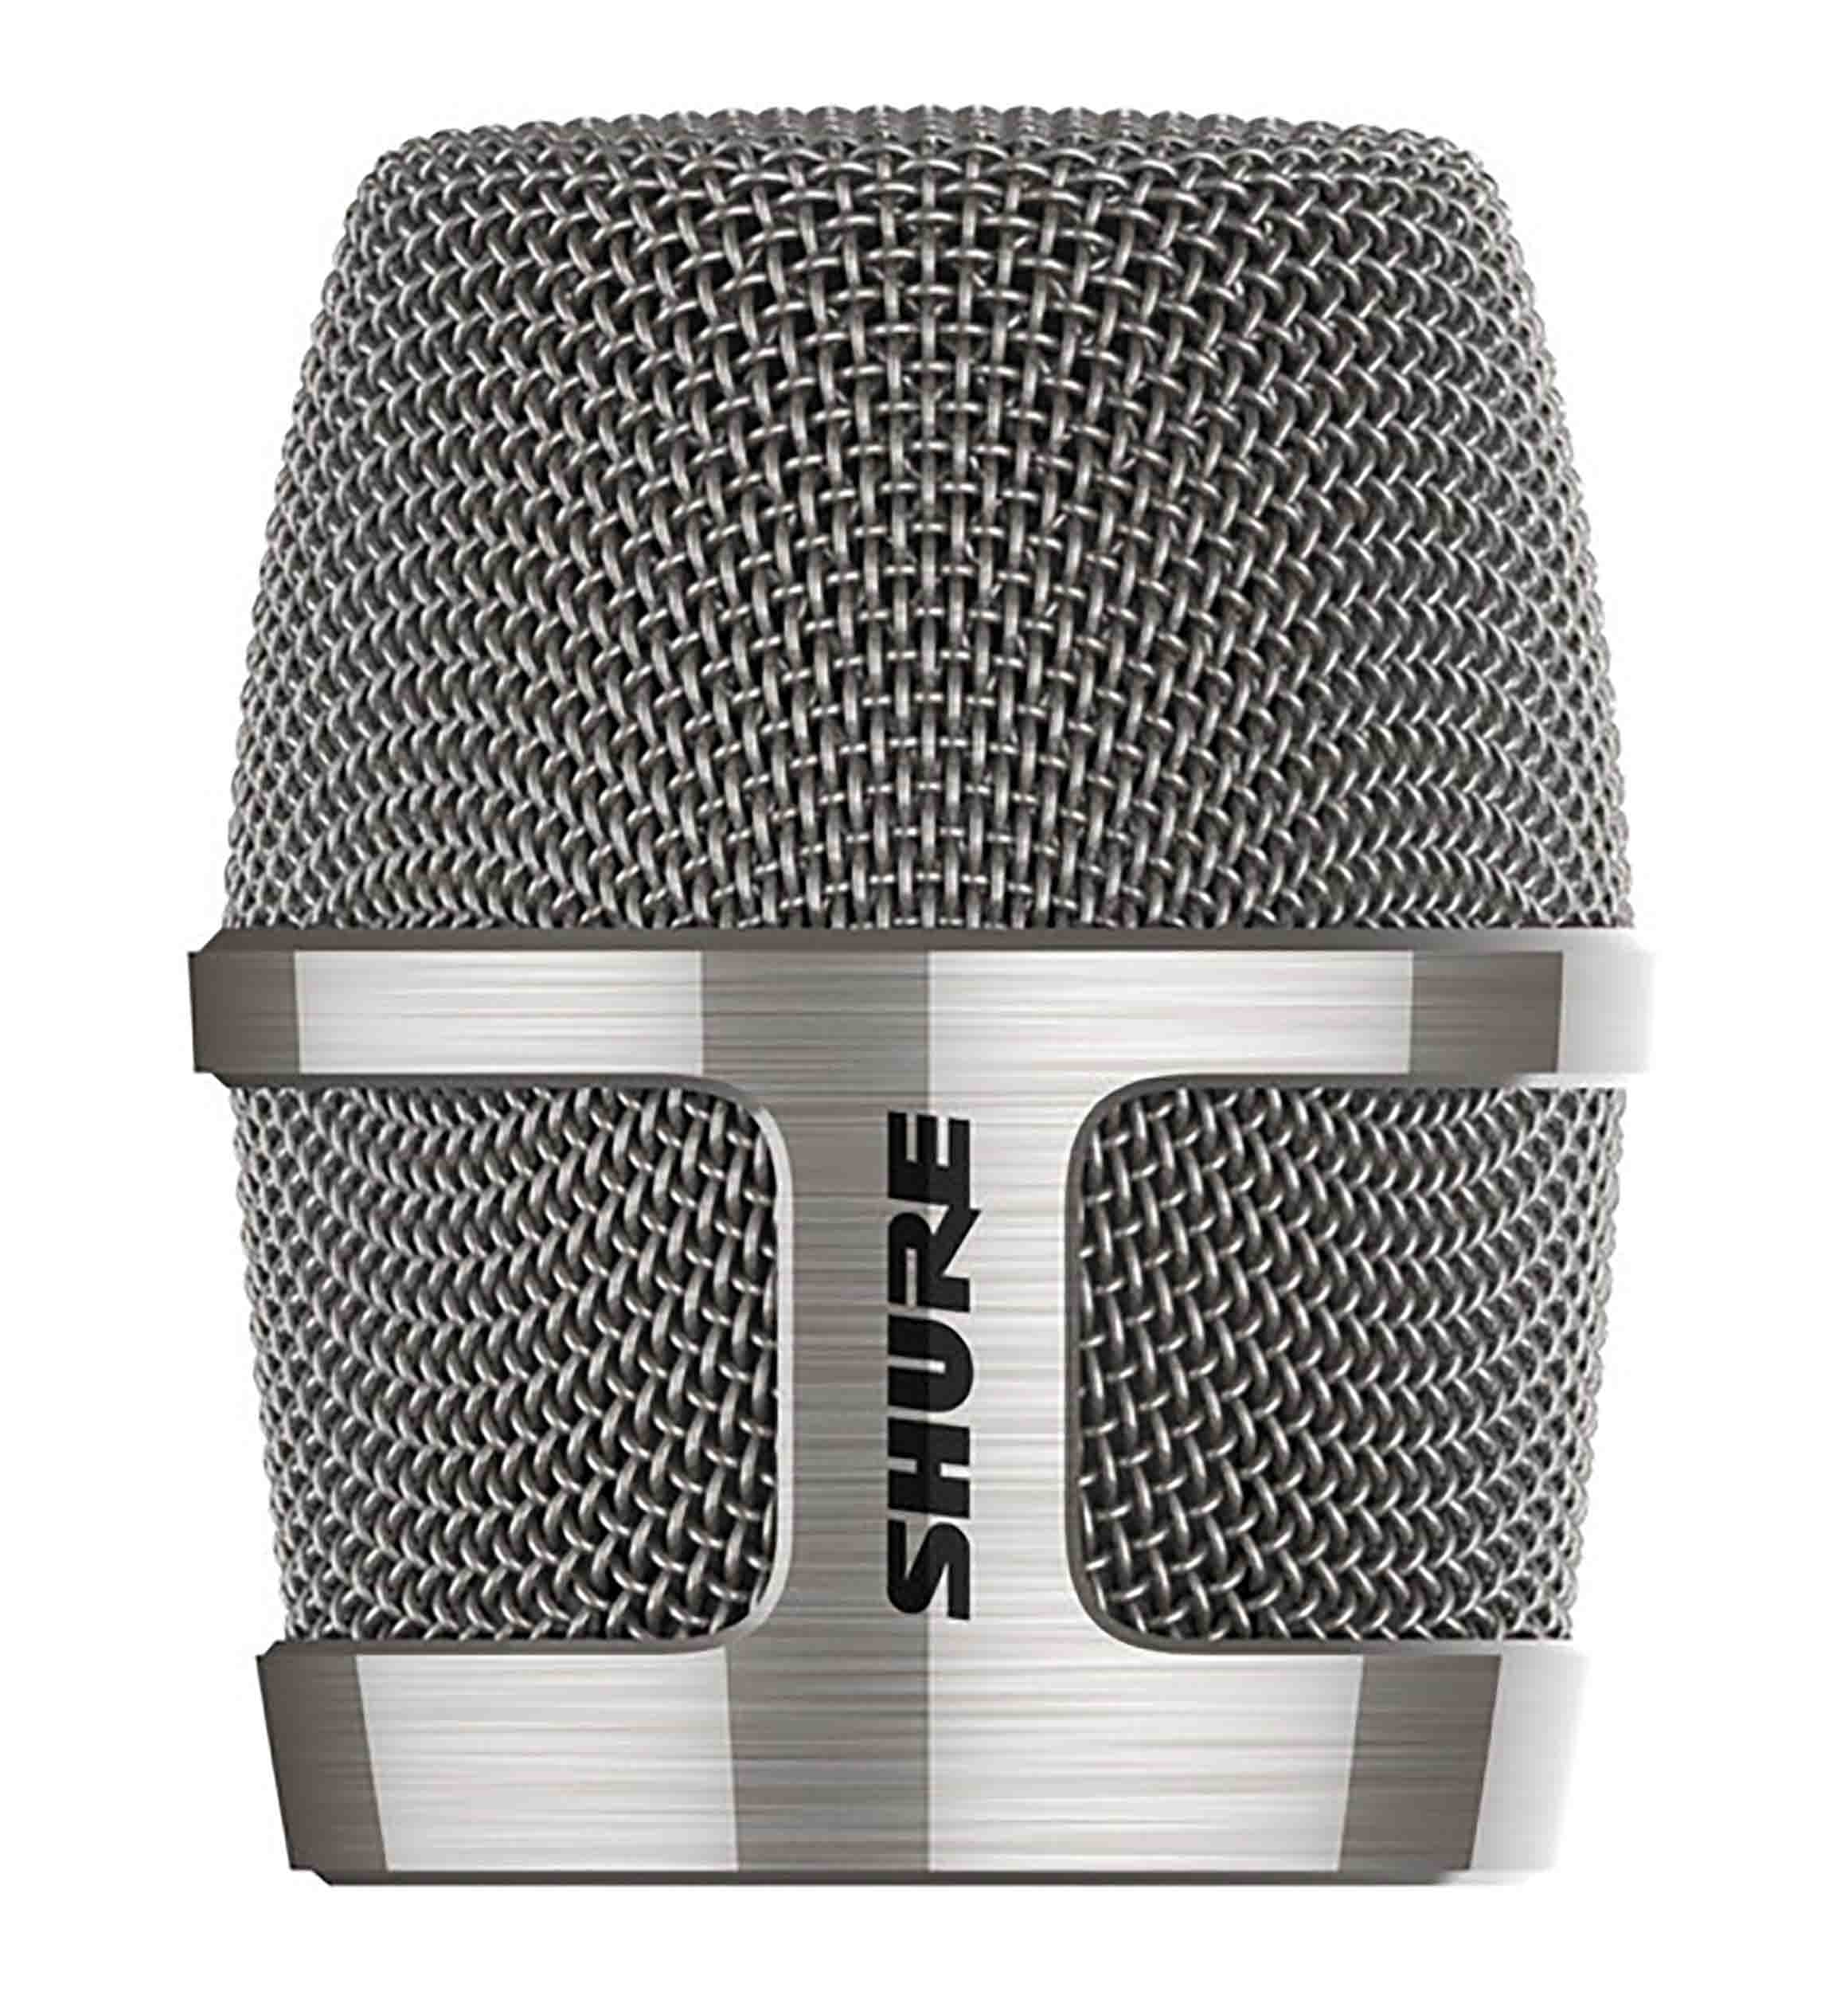 Shure RPM28 Grille for Nexadyne 8/C Cardioid Microphone by Shure